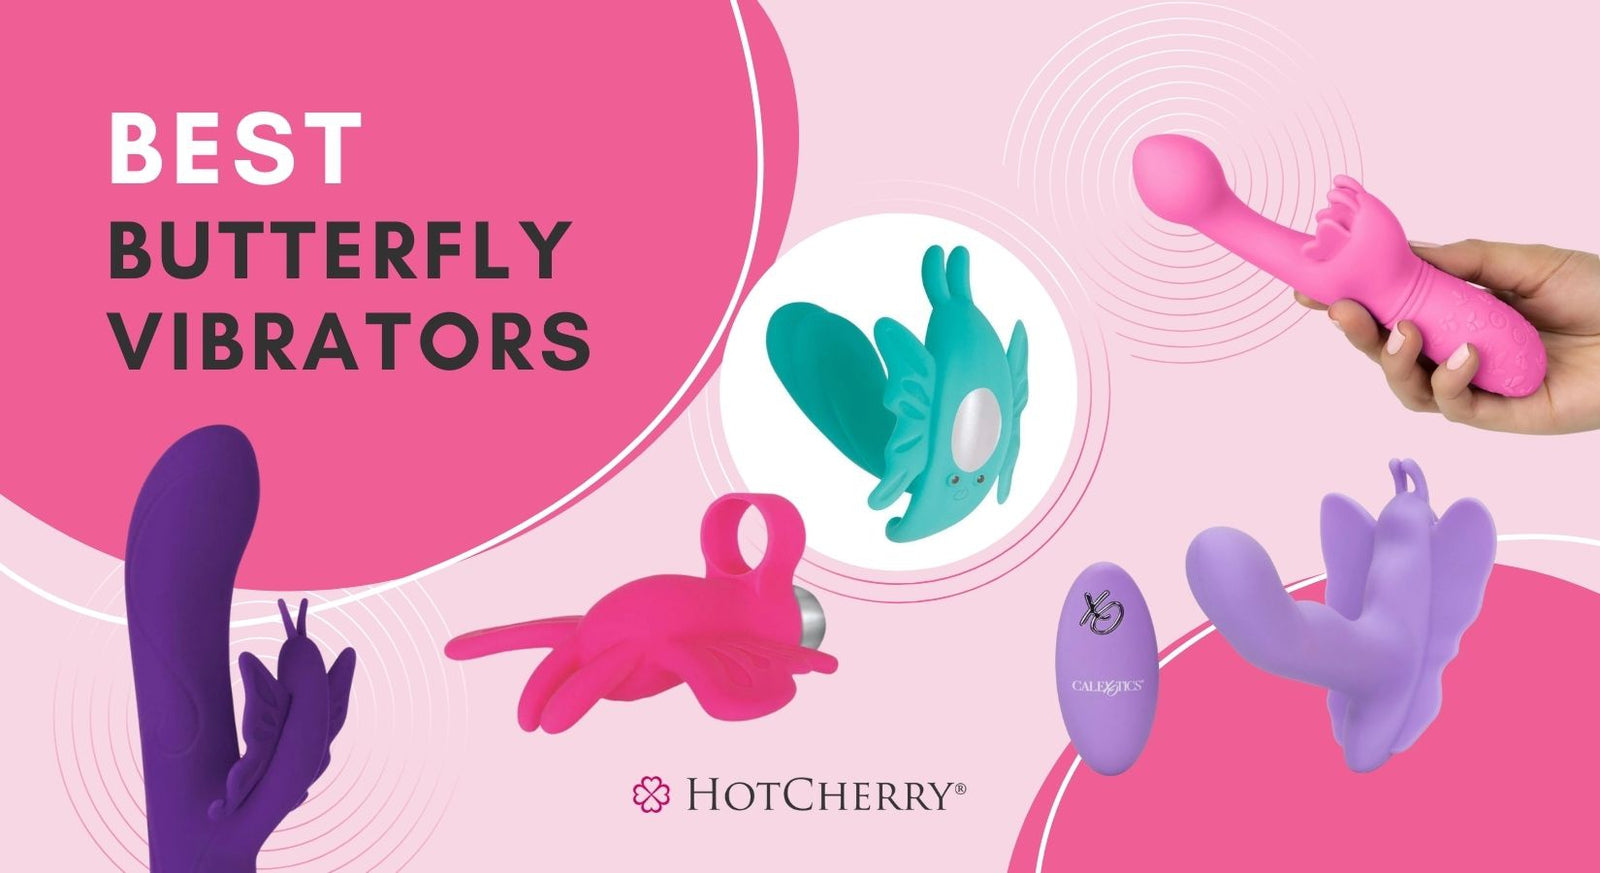 8 Best Butterfly Vibrators You'll Absolutely Love